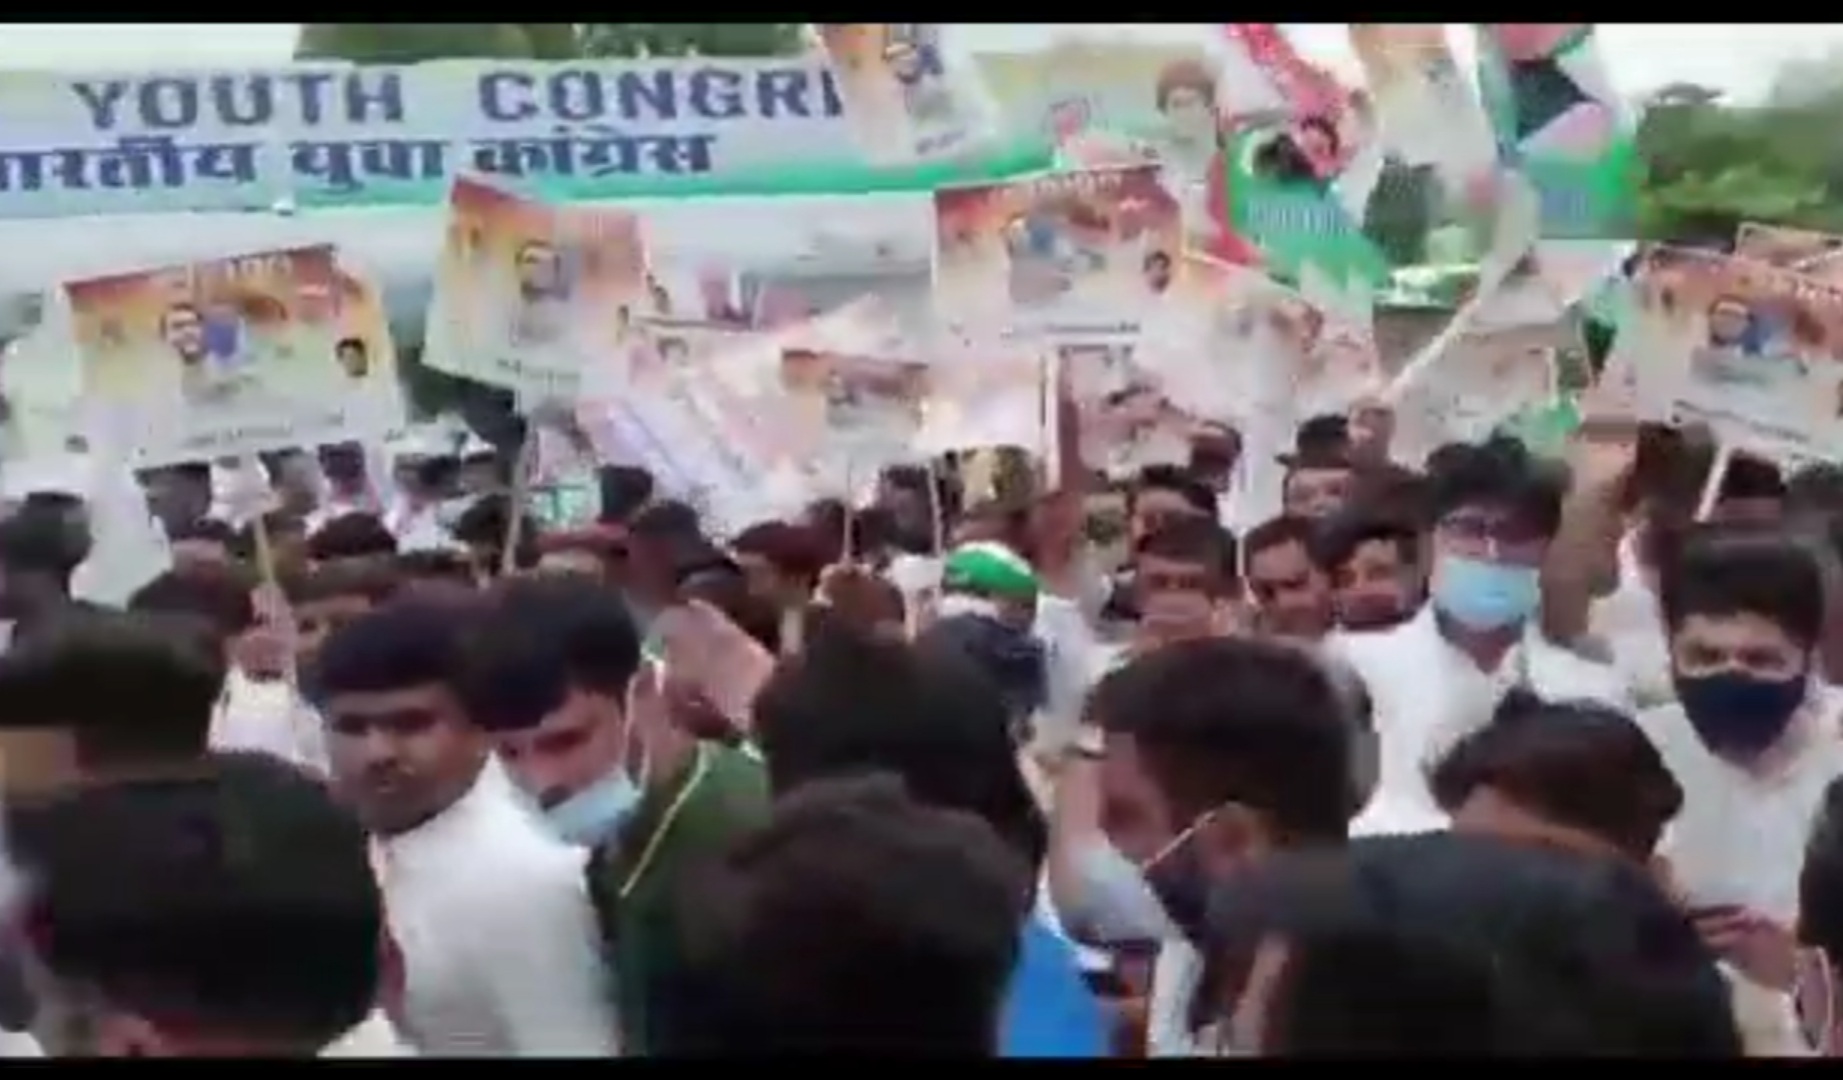 TS Singhdeo Zindabad slogans were raised during the Youth Congress demonstration in Delhi